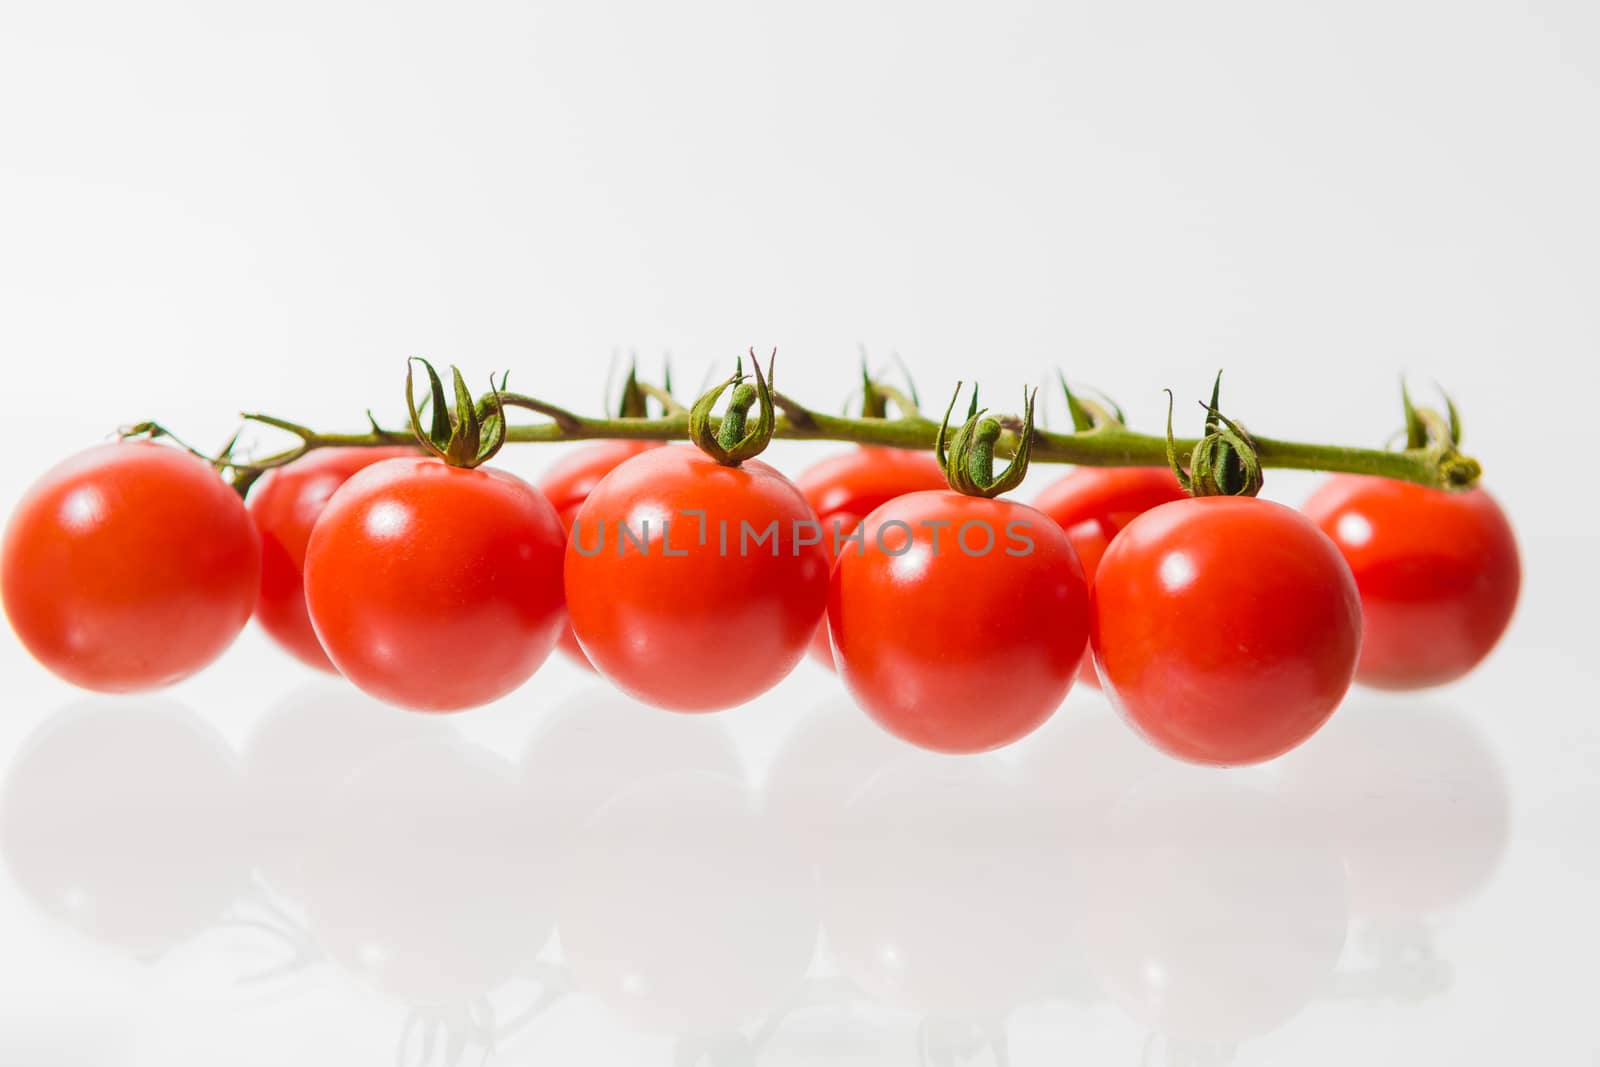 Sprig of Cherry Tomatoes against white background by ben44